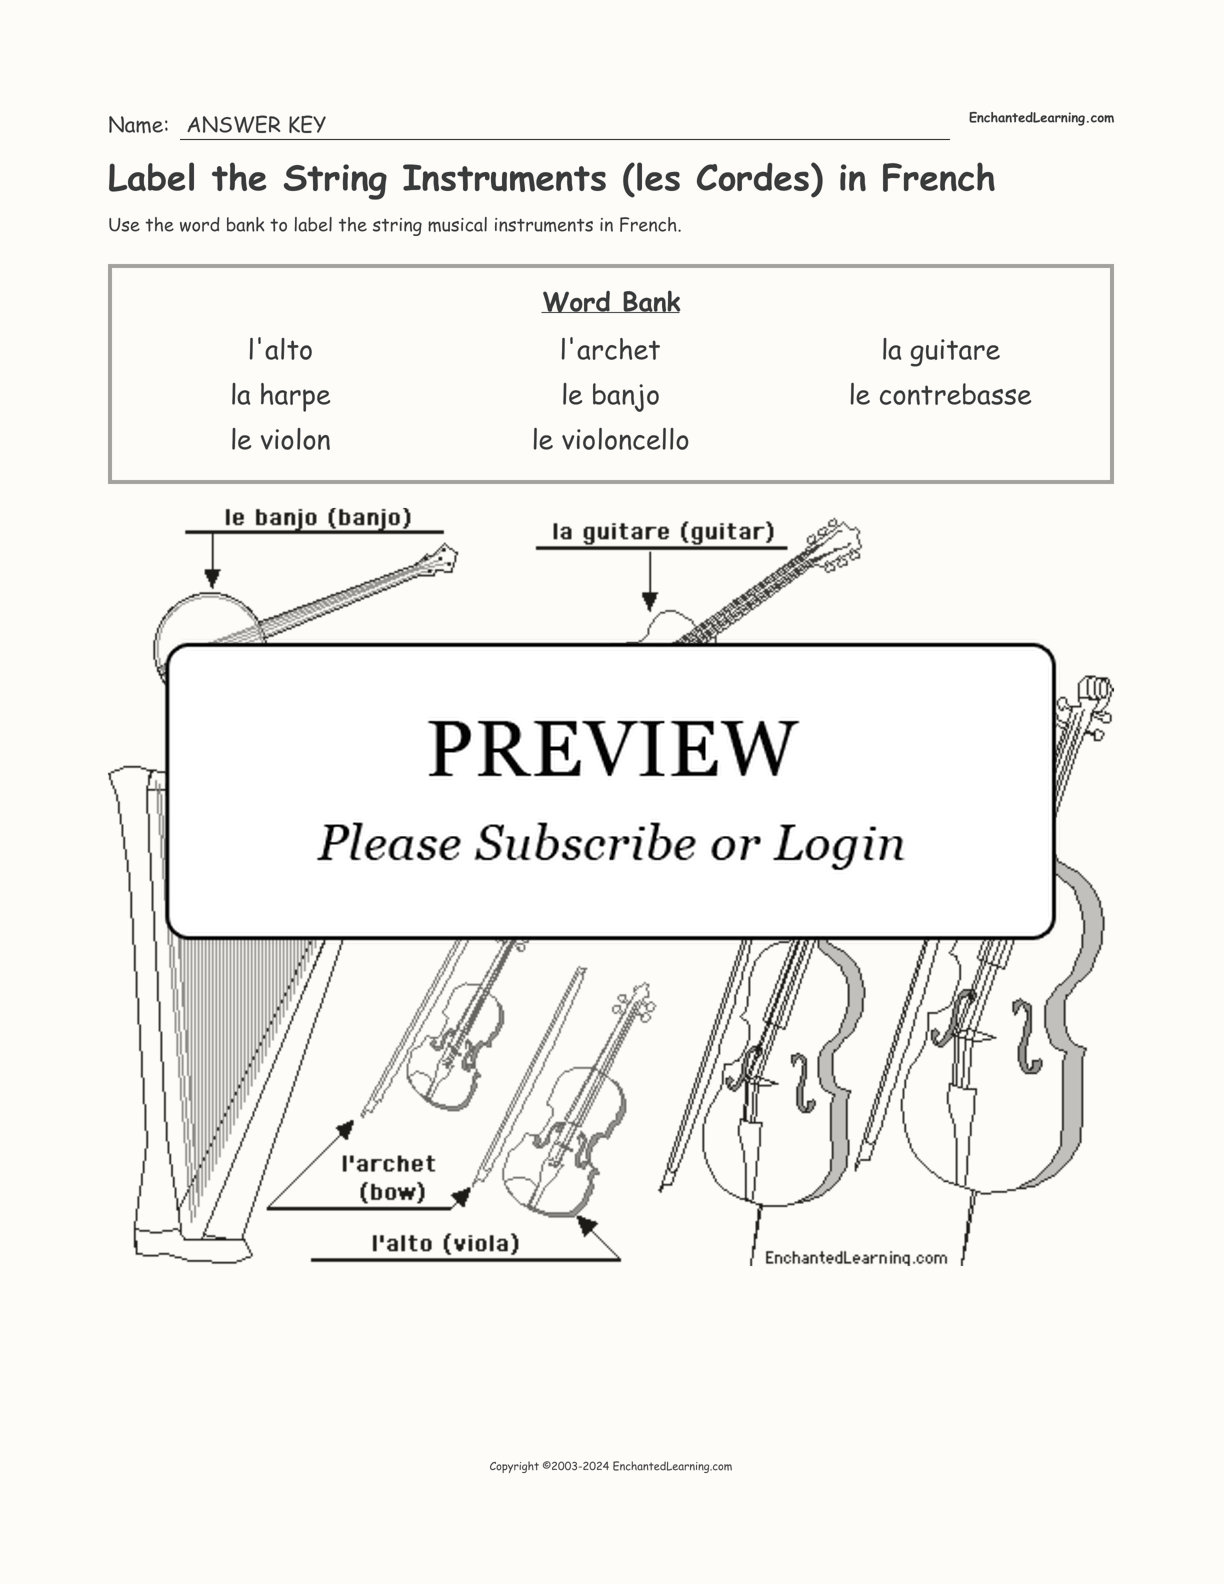 Label the String Instruments (les Cordes) in French interactive worksheet page 2